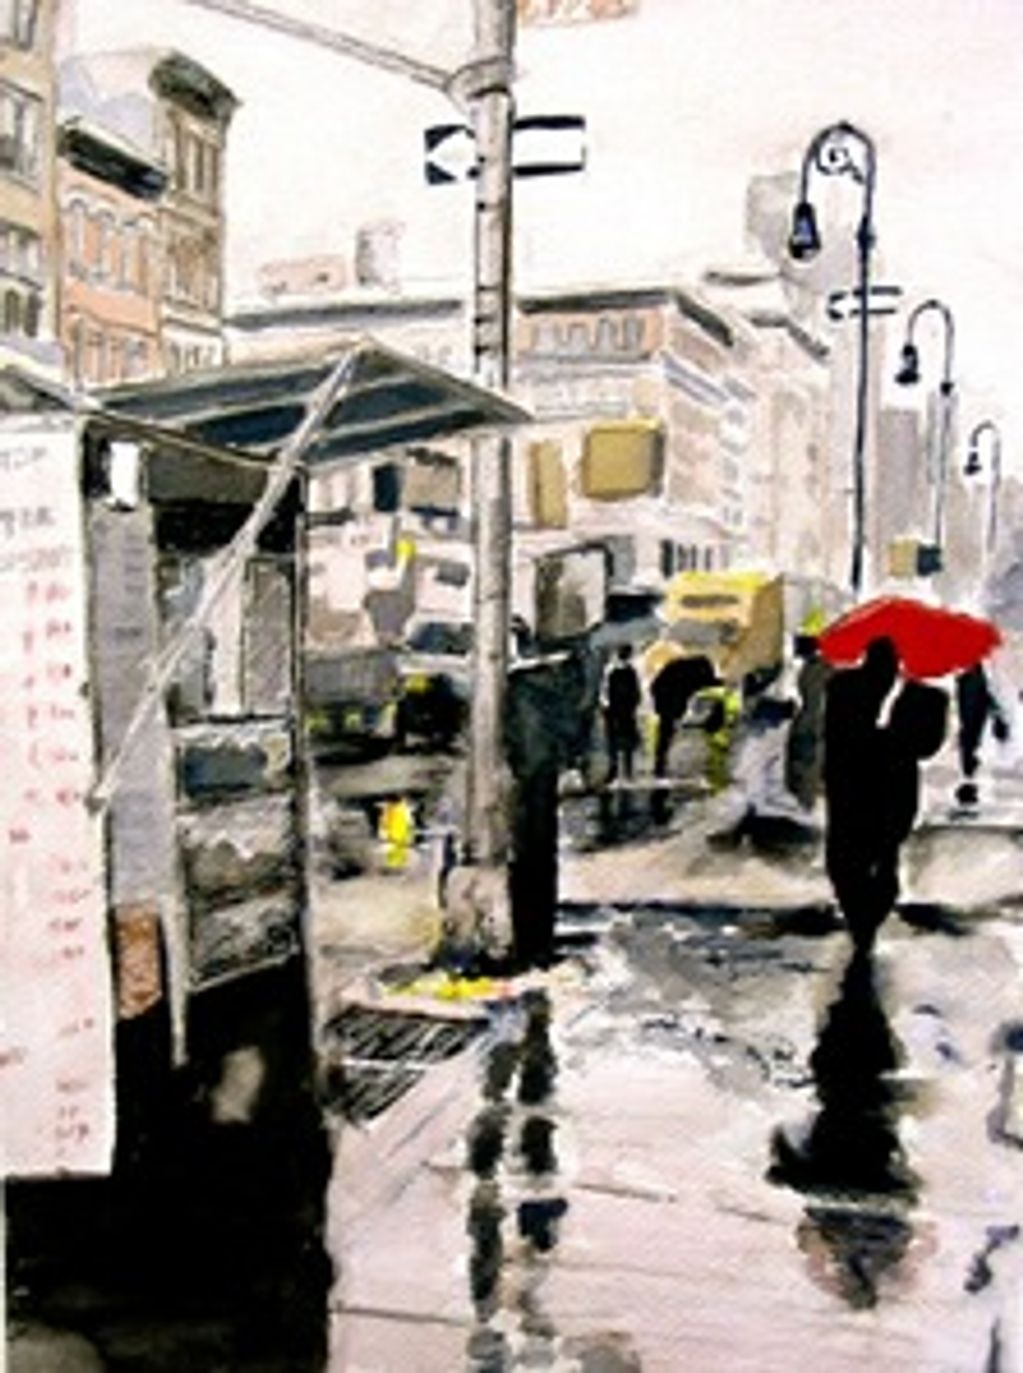 Watercolor 6th Ave. NYC
11W x 14H
SOLD